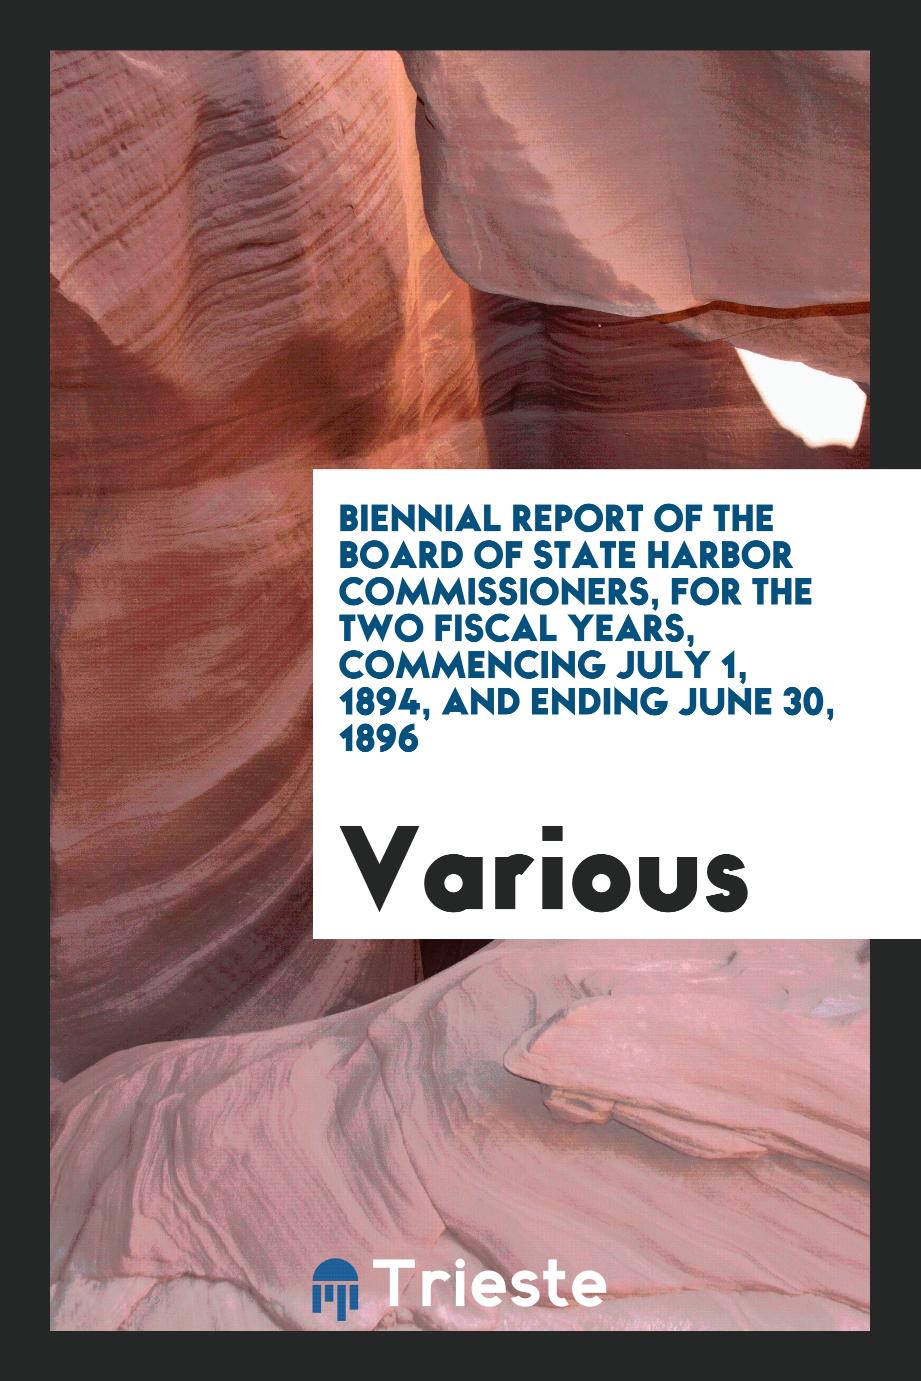 Biennial report of the board of state harbor commissioners, for the two fiscal years, commencing july 1, 1894, and ending june 30, 1896